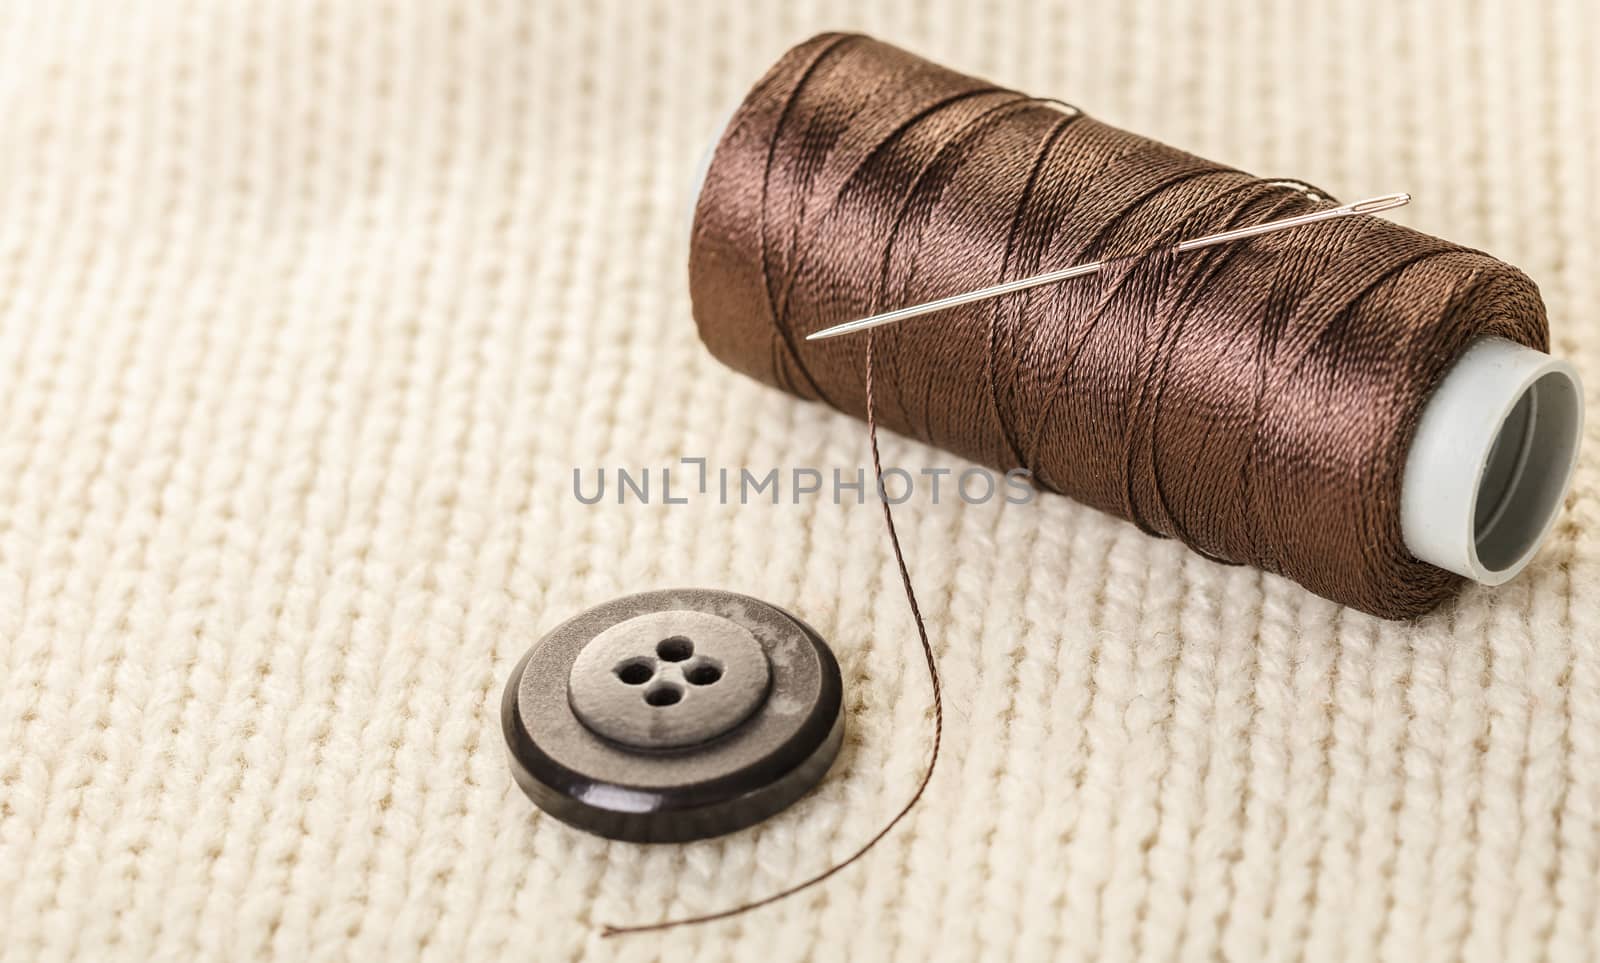 colored thread and buttons on white knitted fabric